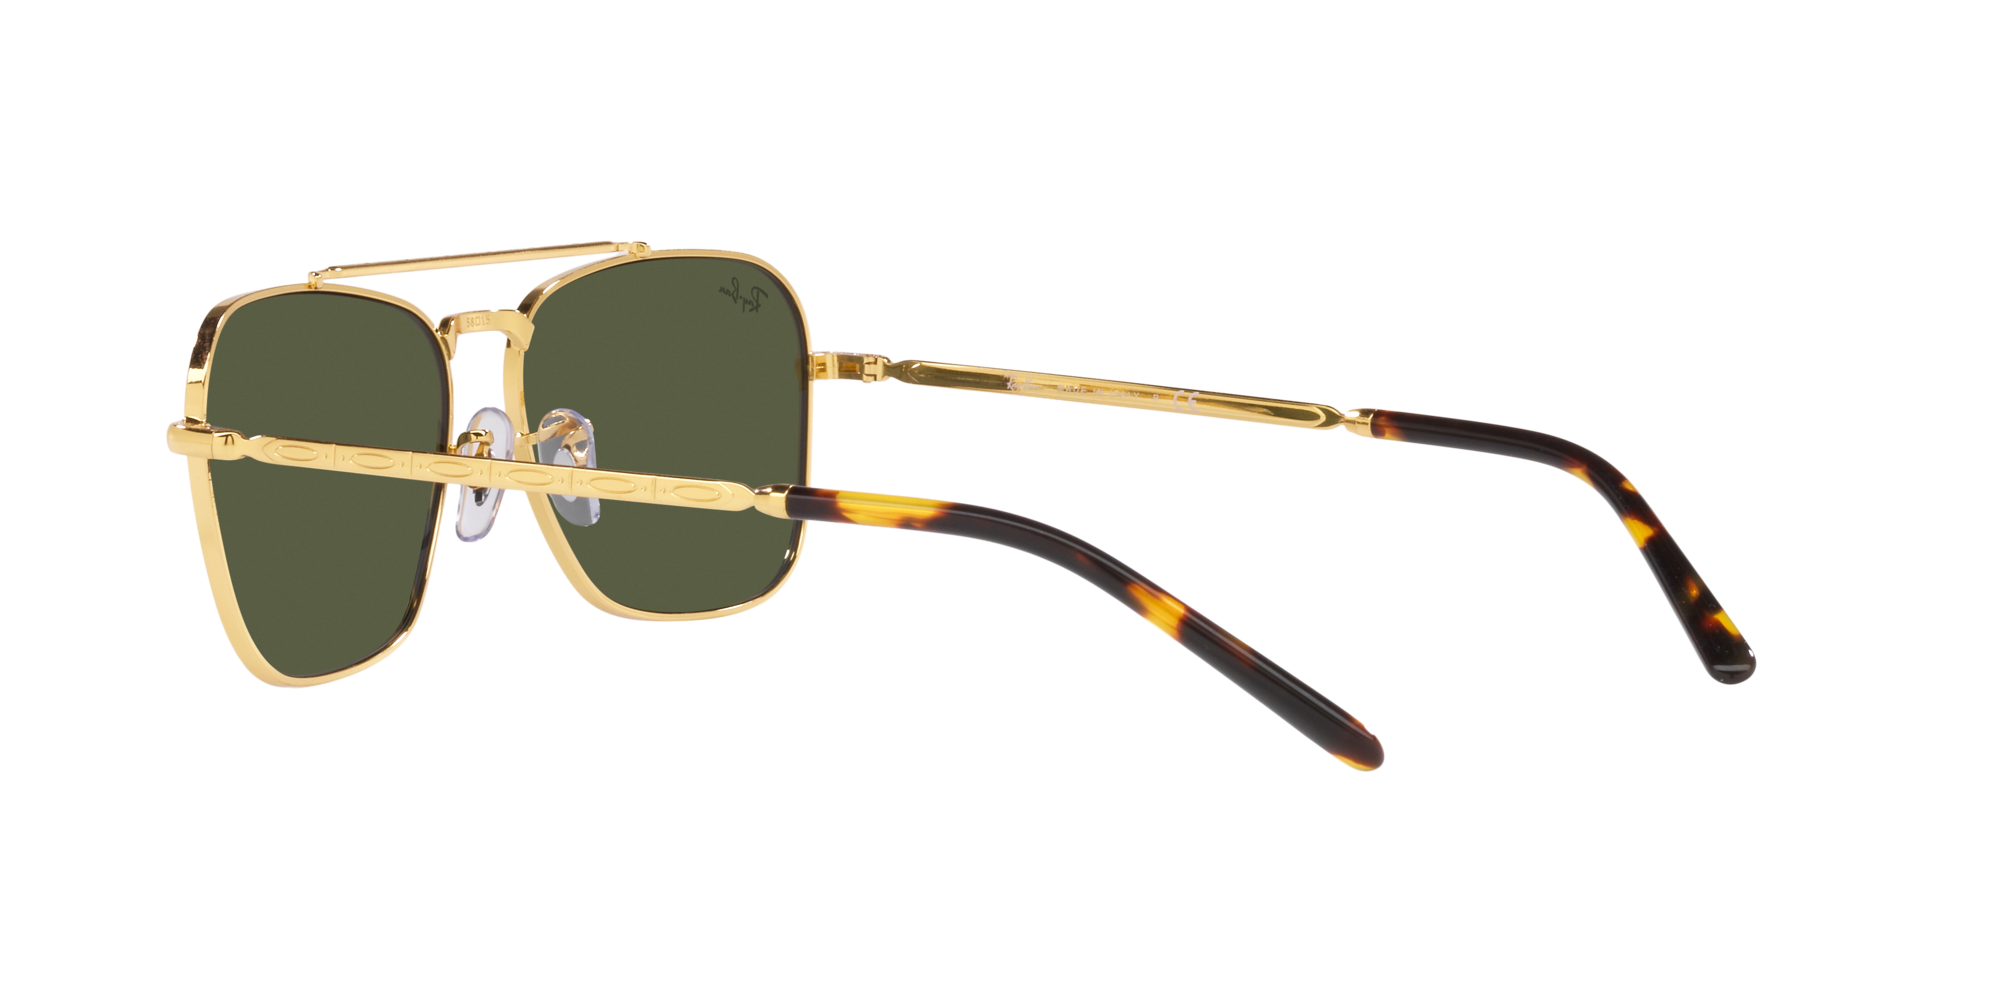 New Caravan Ray Ban Sonnenbrille in Gold RB3636 919631 58